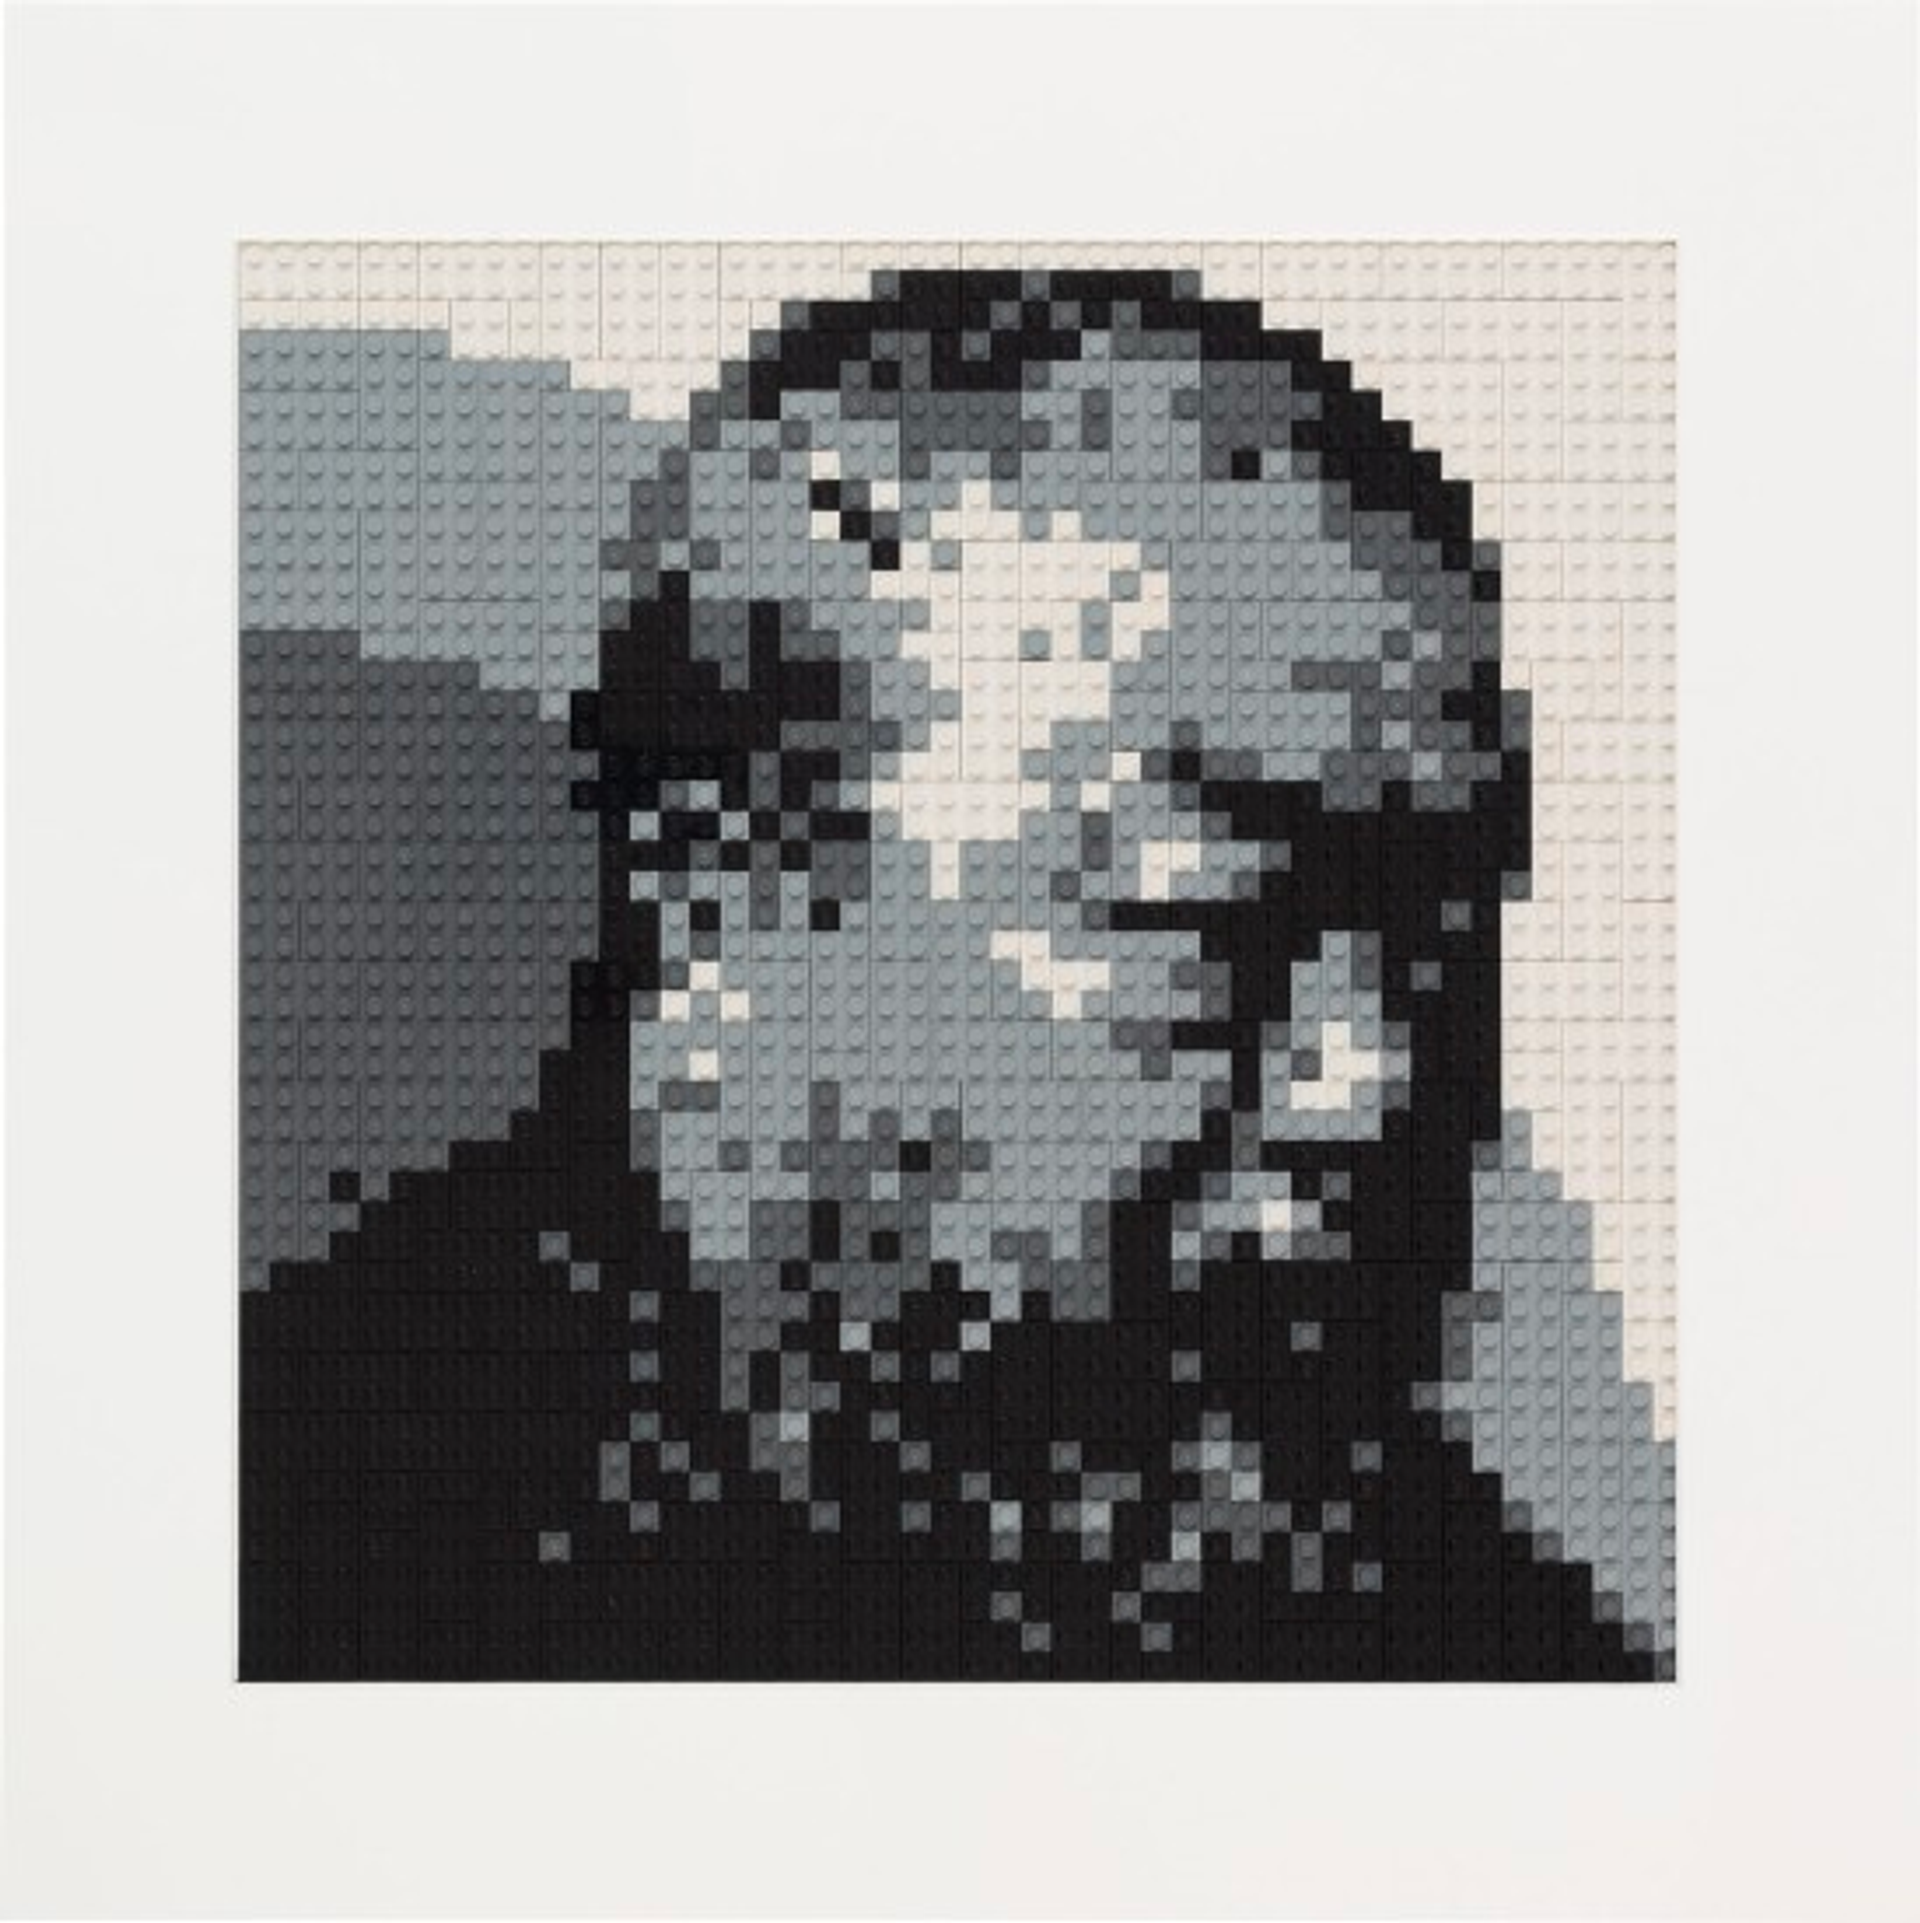 A portrait of artist Ai Weiwei from a side profile, made out of lego